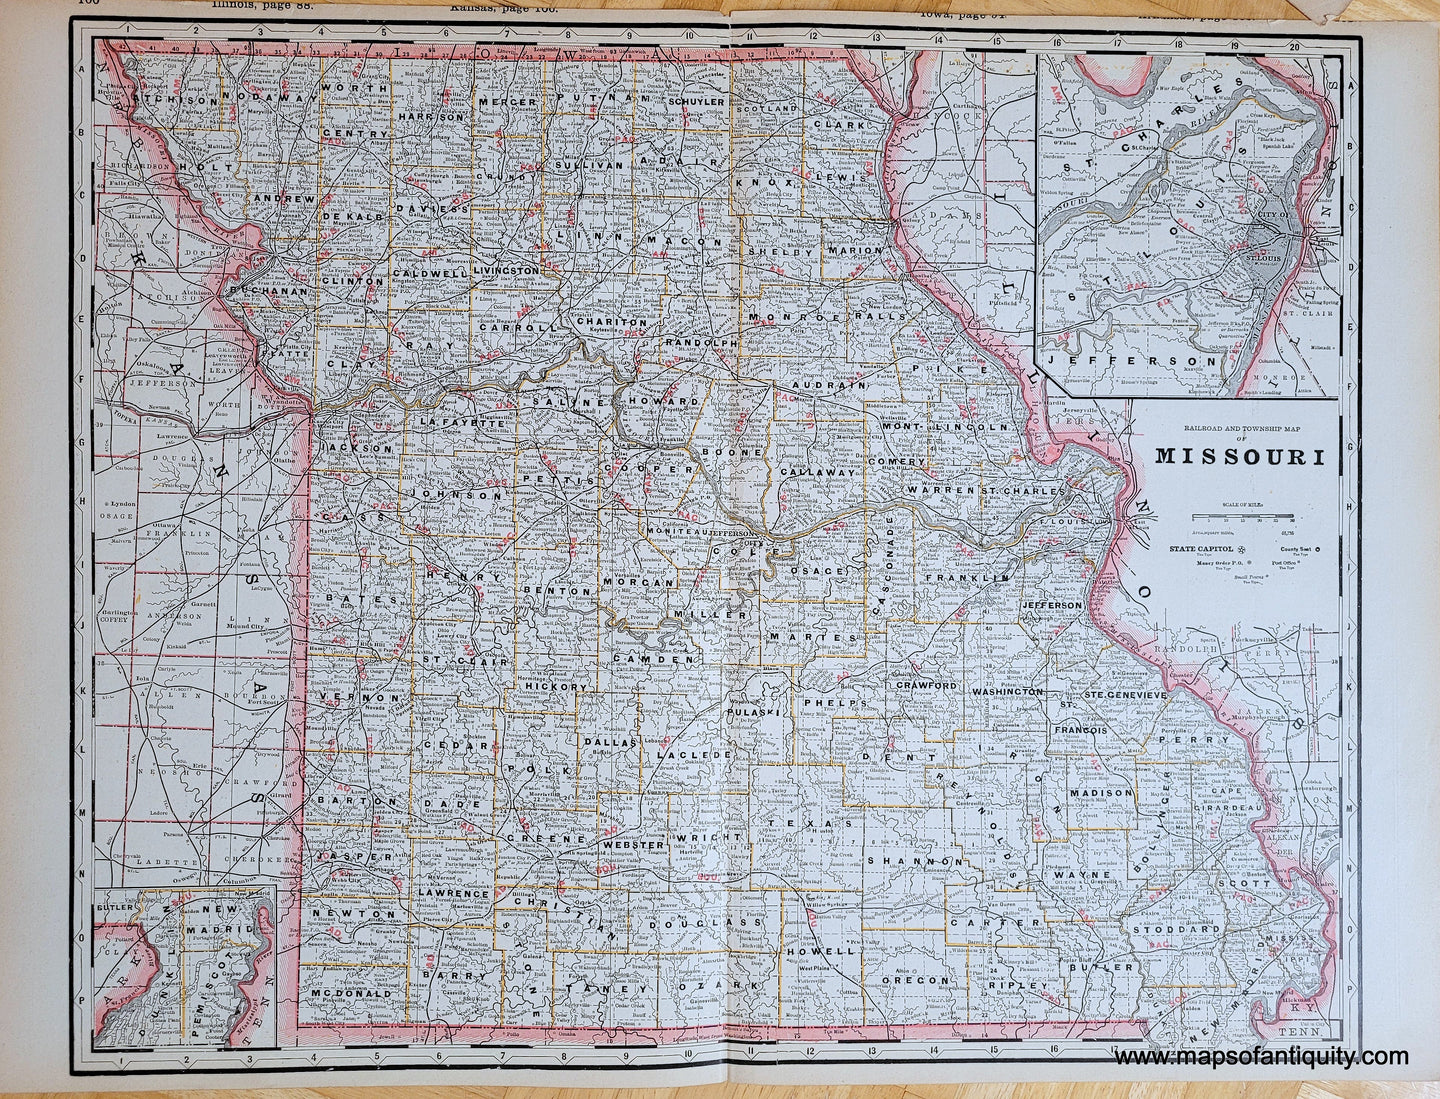 Genuine-Antique-Map-Railroad-and-Township-Map-of-Missouri-Missouri-1887-Grant-Maps-Of-Antiquity-1800s-19th-century